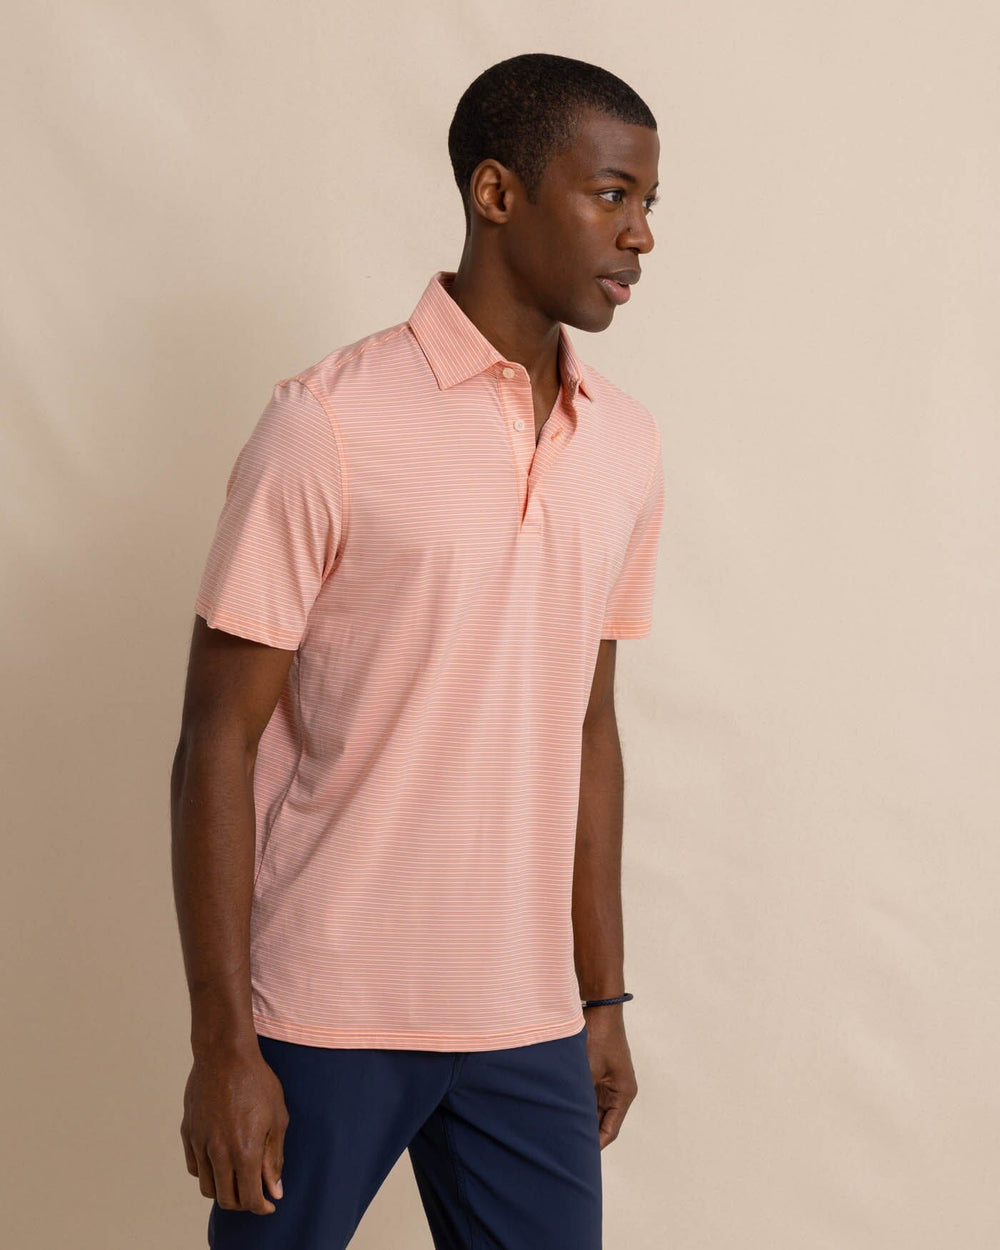 The front view of the Southern Tide brrr-eeze Baytop Stripe Performance Polo by Southern Tide - Desert Flower Coral